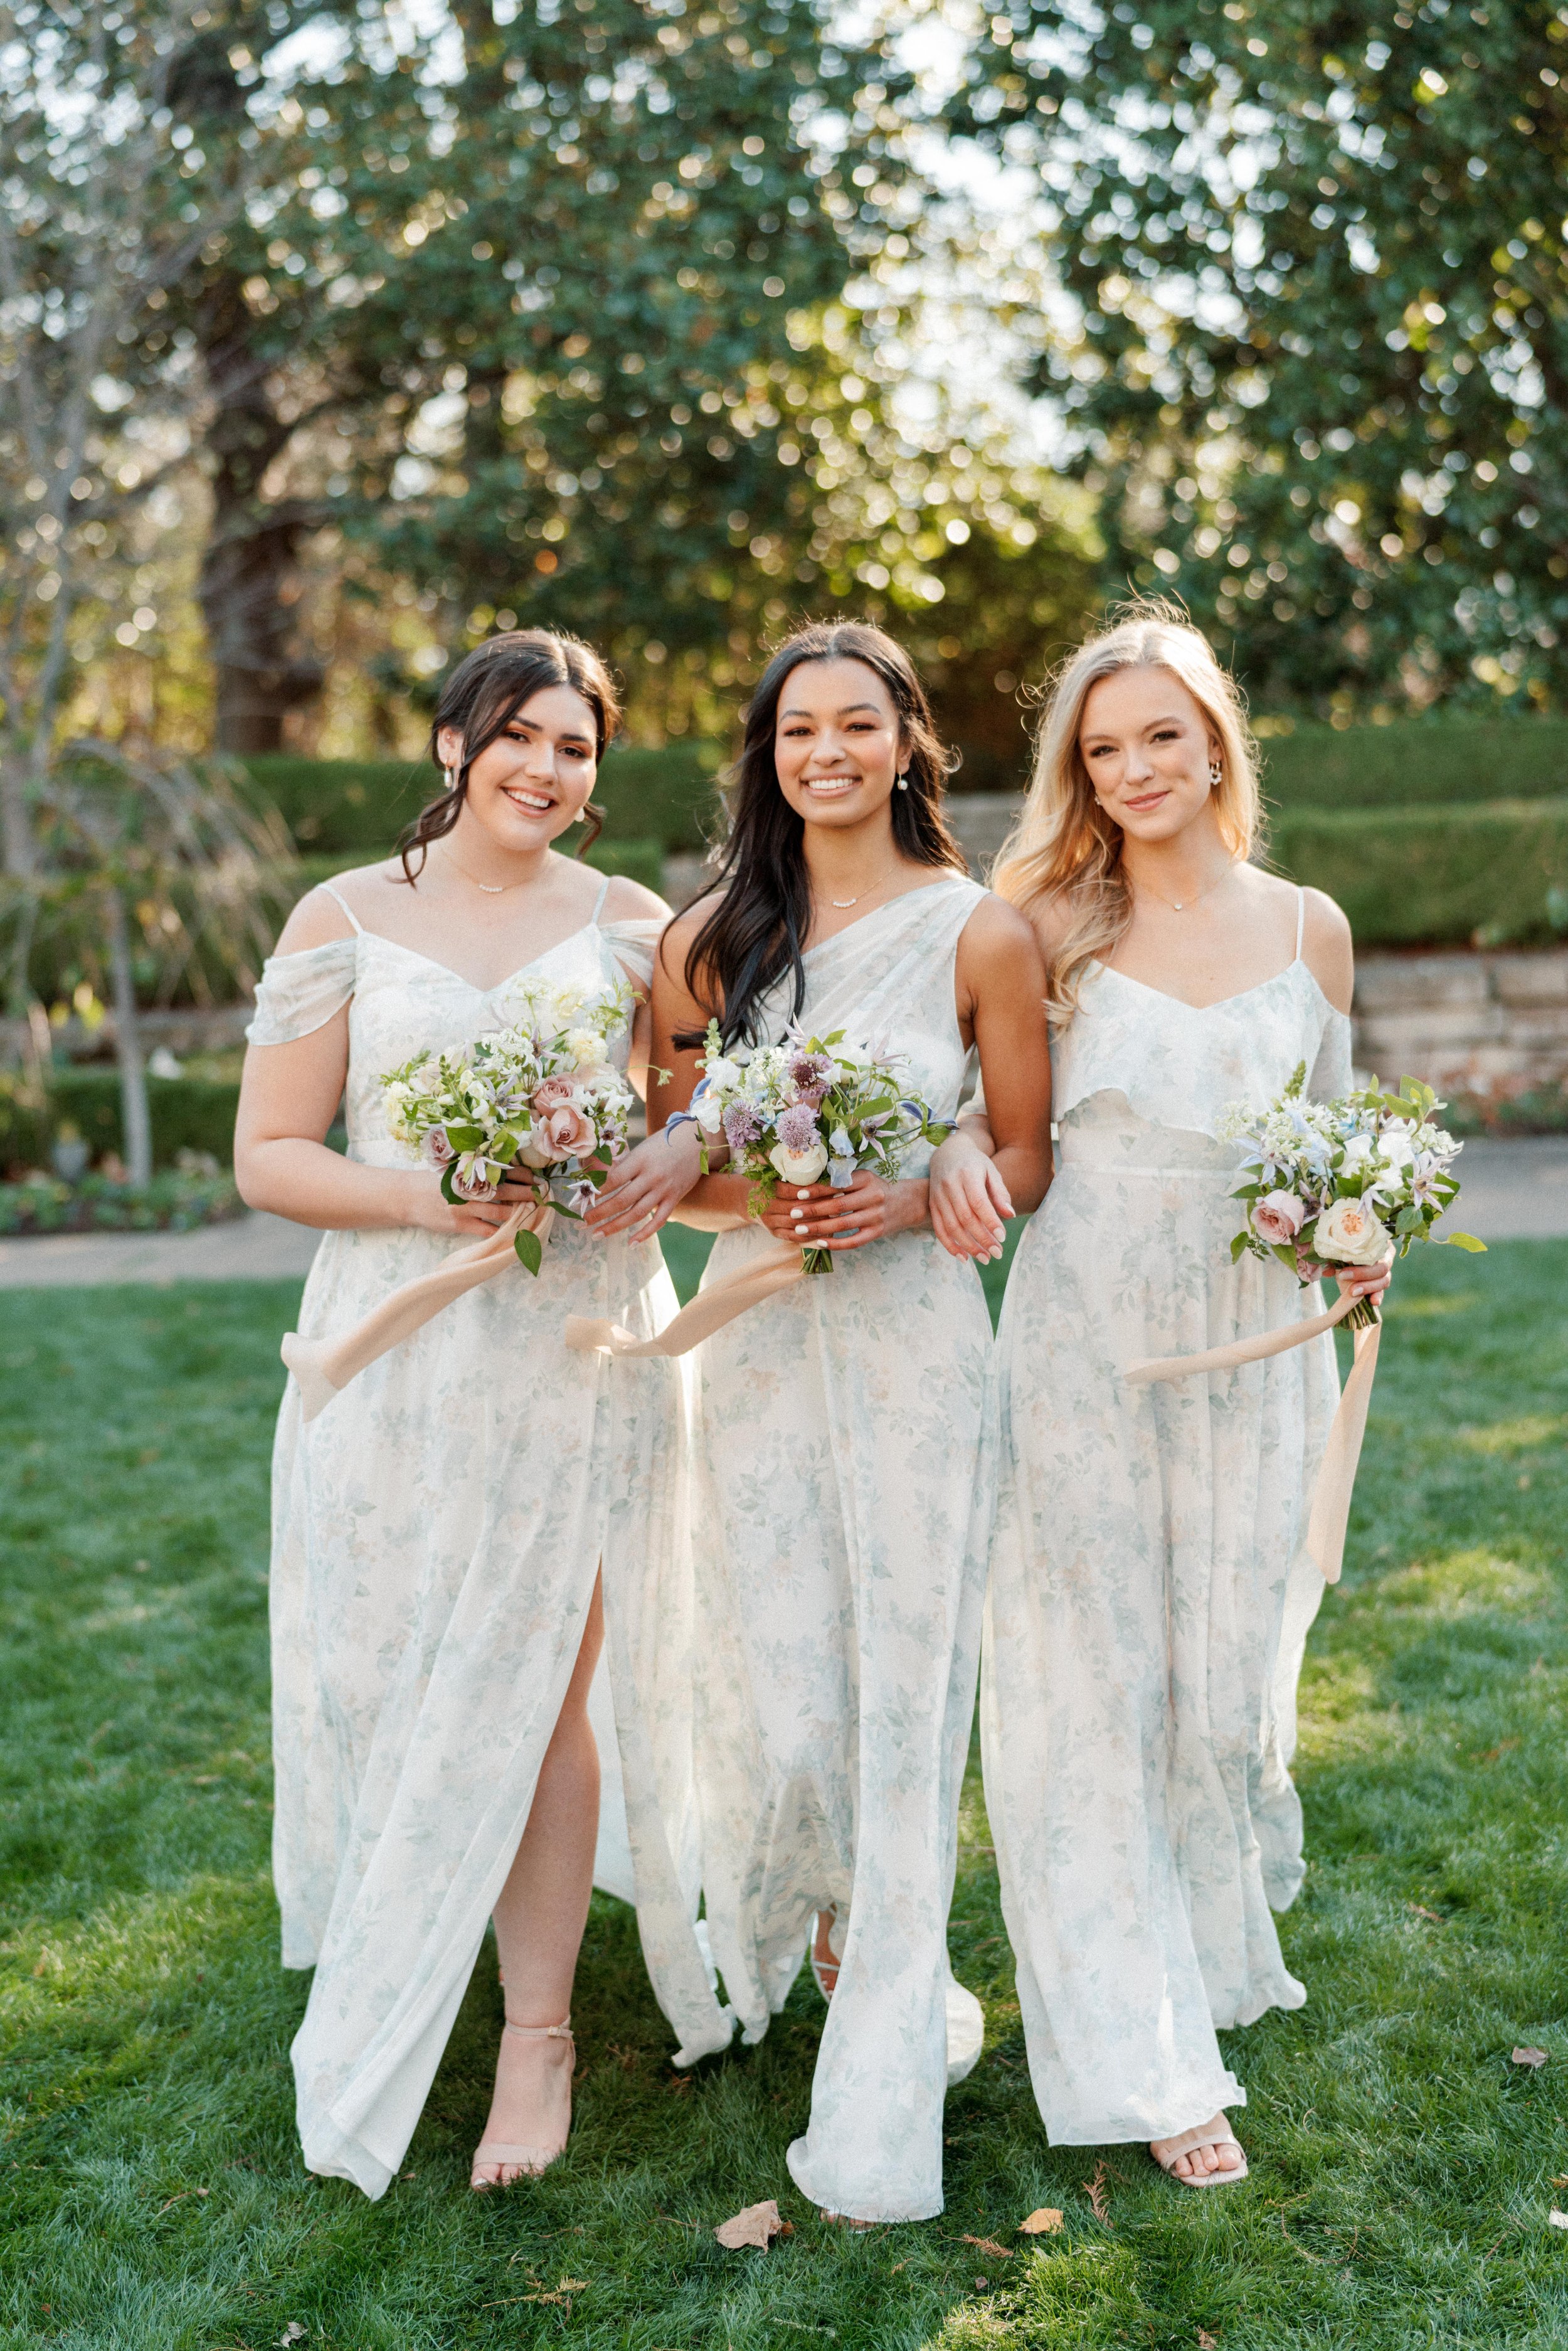 Introducing Our Brand New Line of Floral Bridesmaid Dresses, in